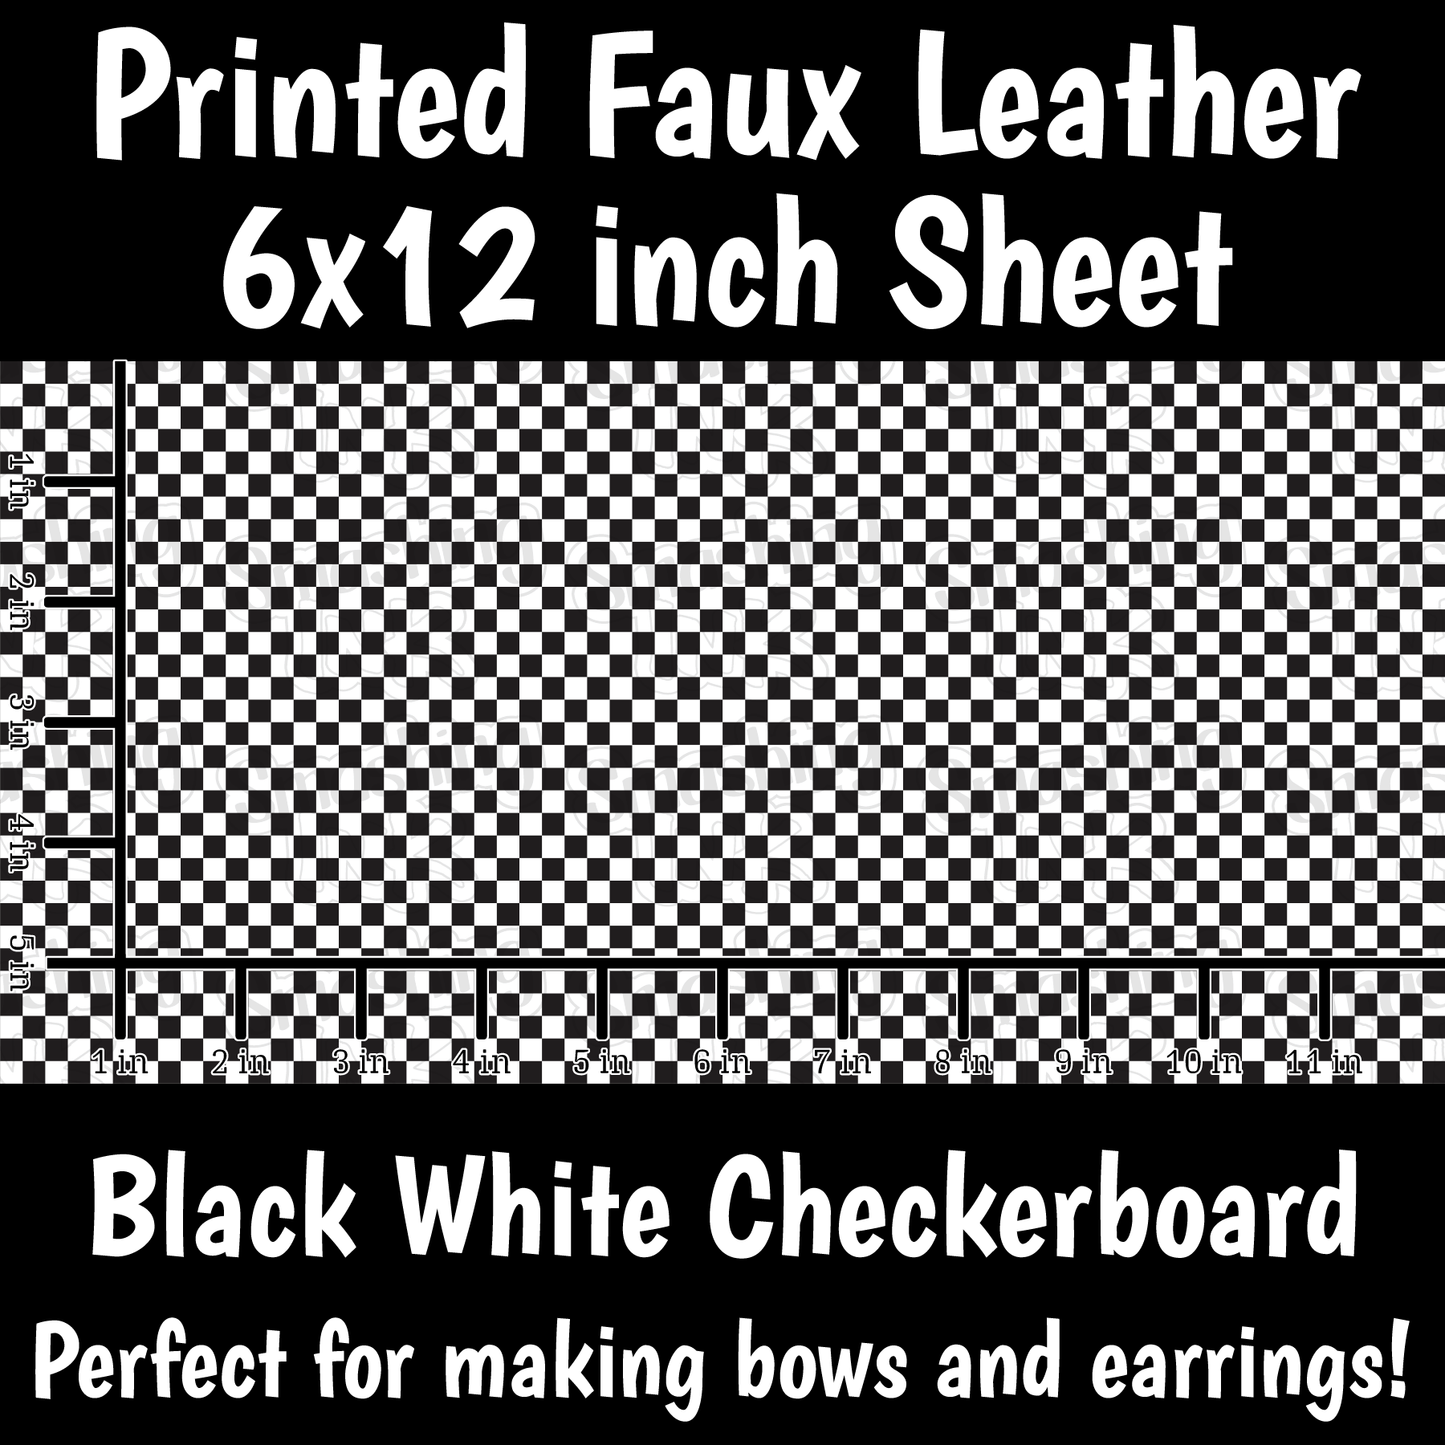 Black White Checkerboard - Faux Leather Sheet (SHIPS IN 3 BUS DAYS)